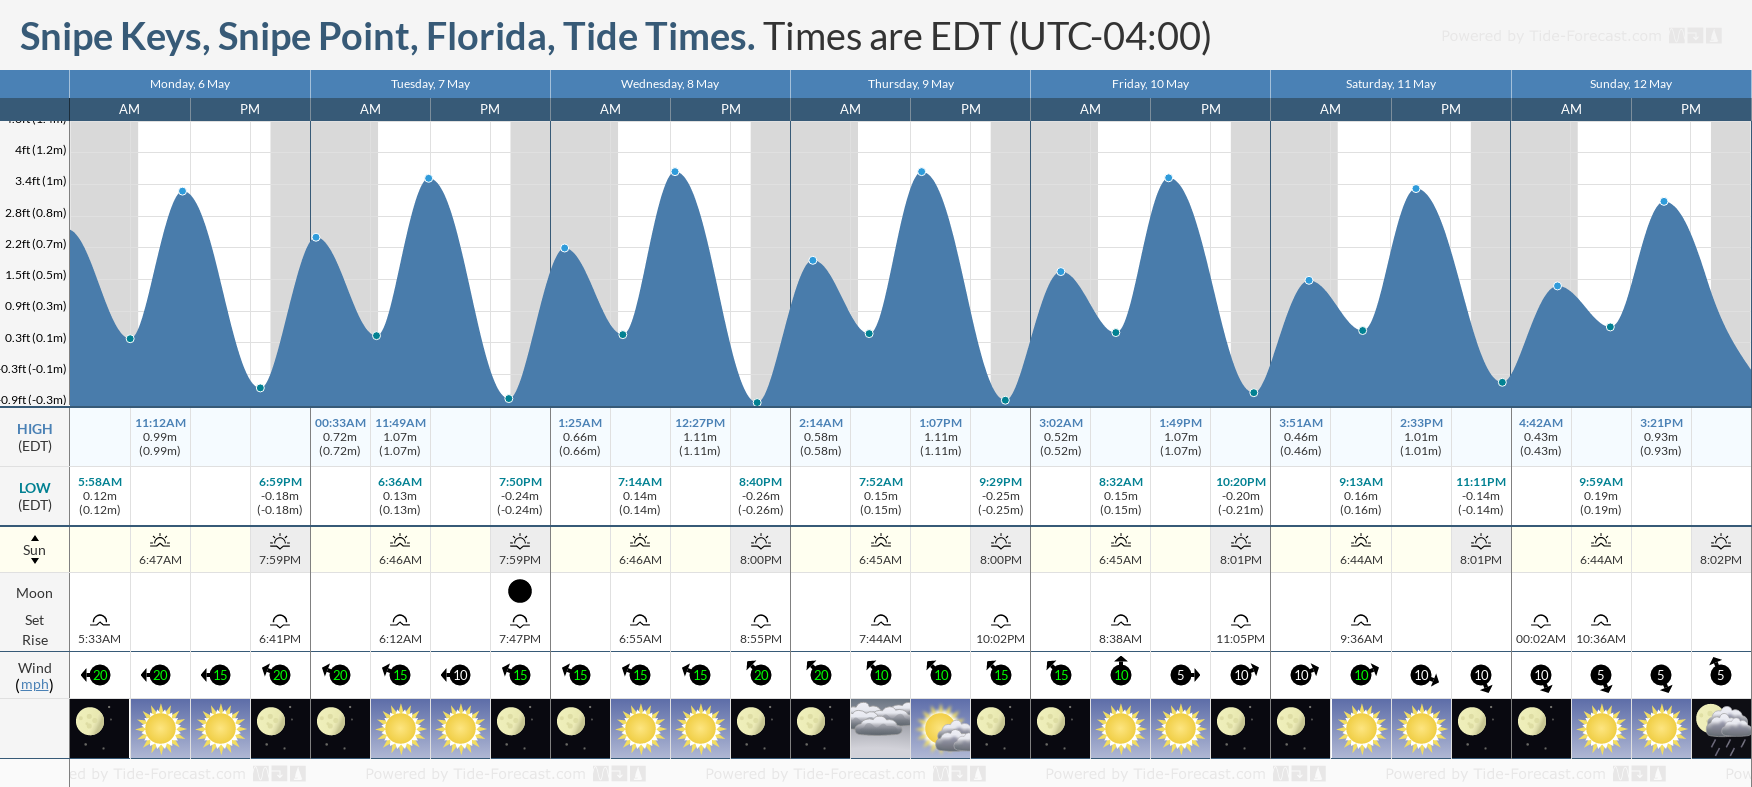 Snipe Keys, Snipe Point, Florida Tide Chart including high and low tide times for the next 7 days